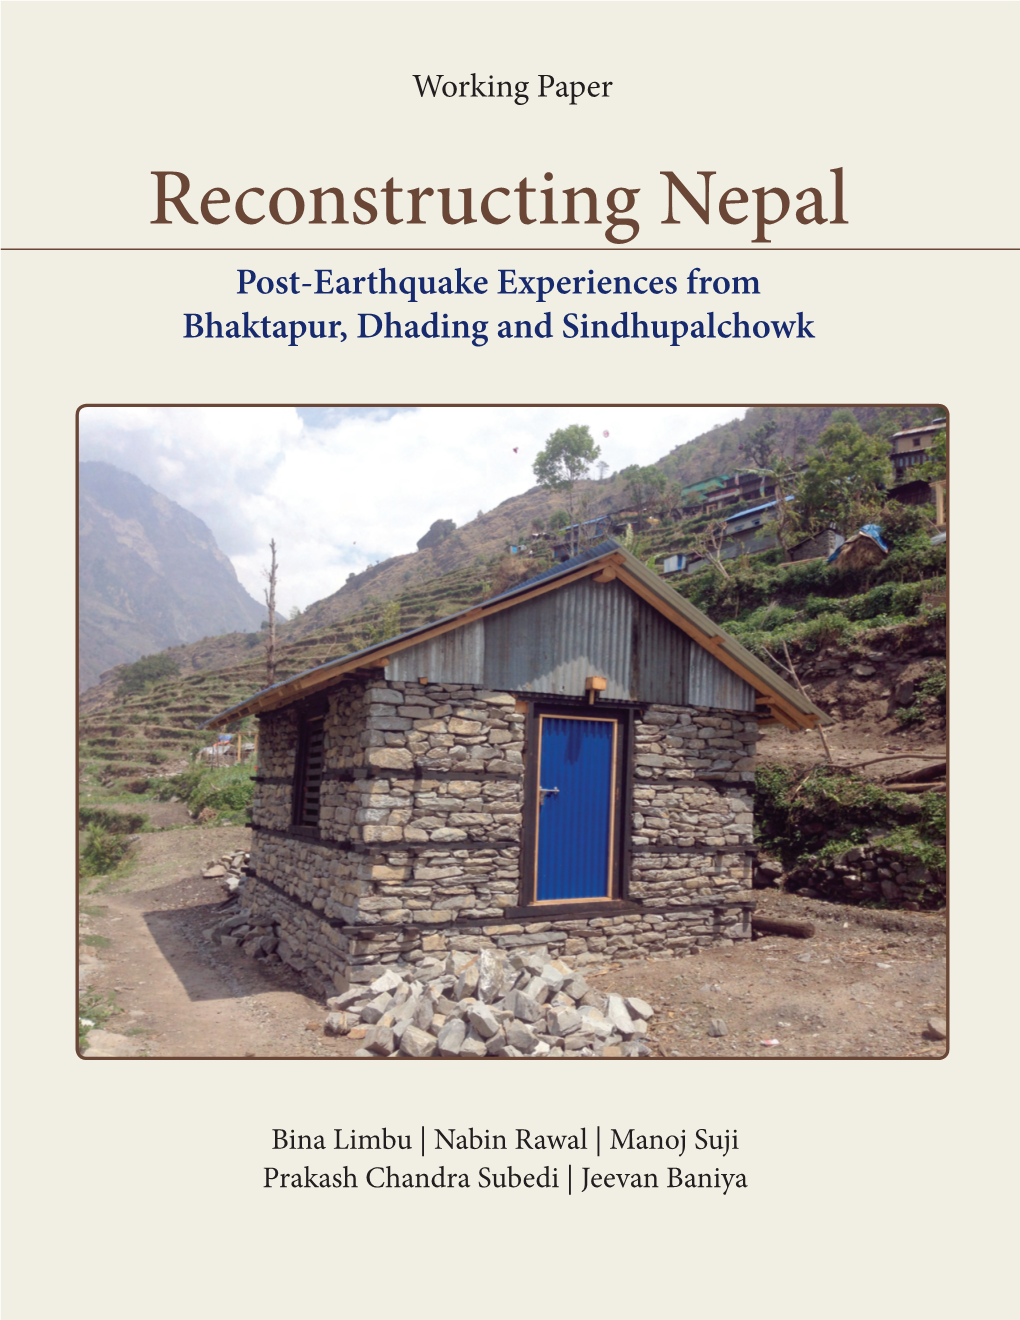 Reconstructing Nepal Post-Earthquake Experiences from Bhaktapur, Dhading and Sindhupalchowk